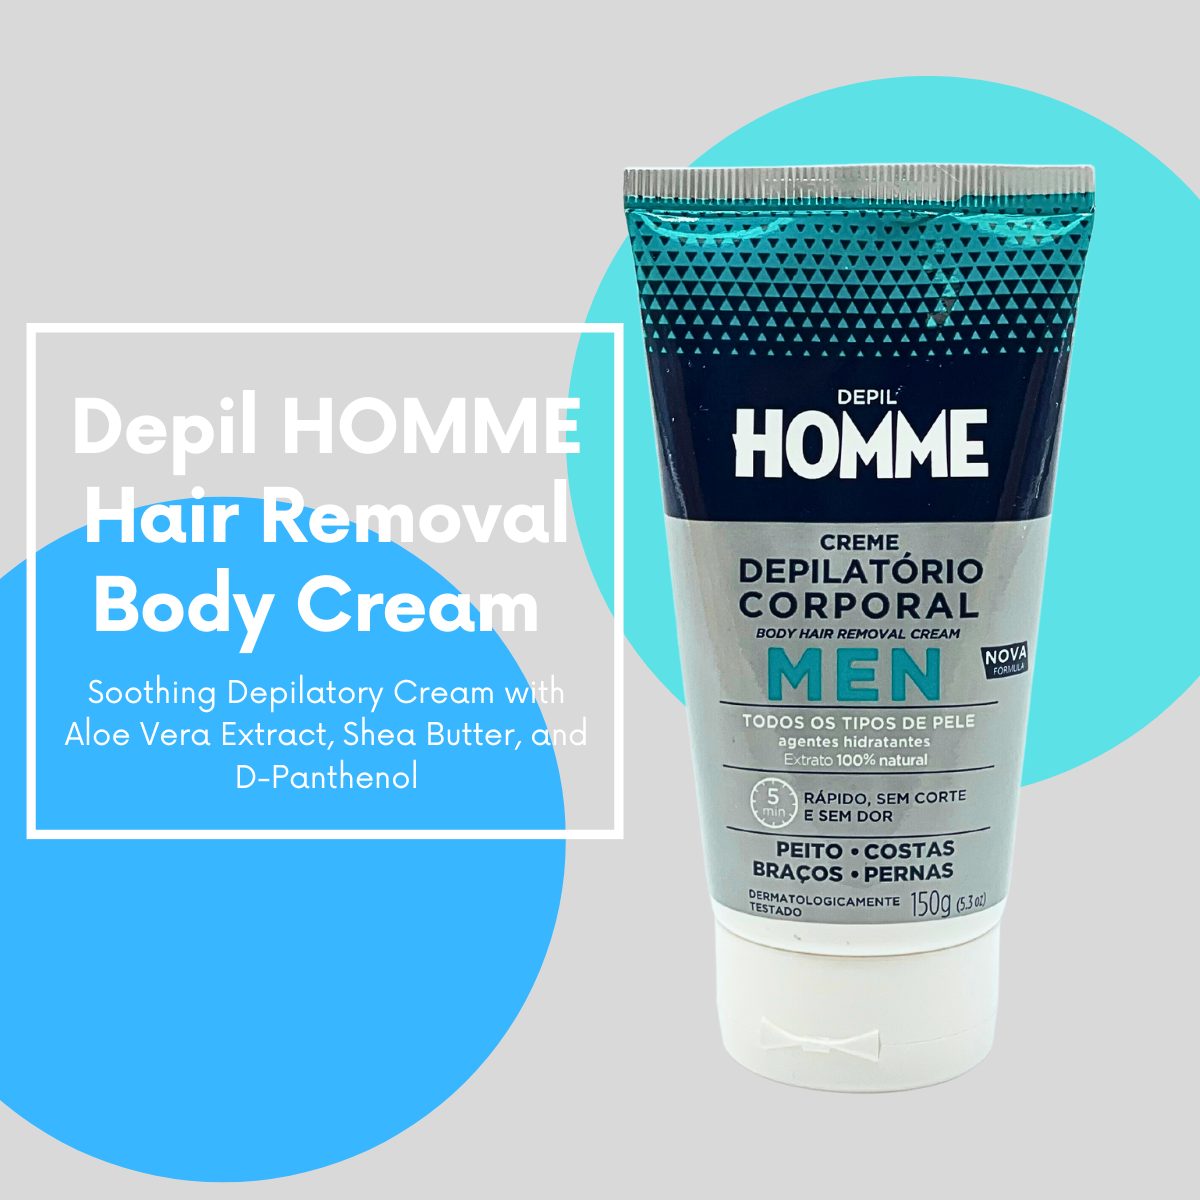 Depil HOMME Hair Removal Body Cream, Soothing Depilatory Cream, 150 g (3 Pack) - Buy professional cosmetics dedicated to hair removal